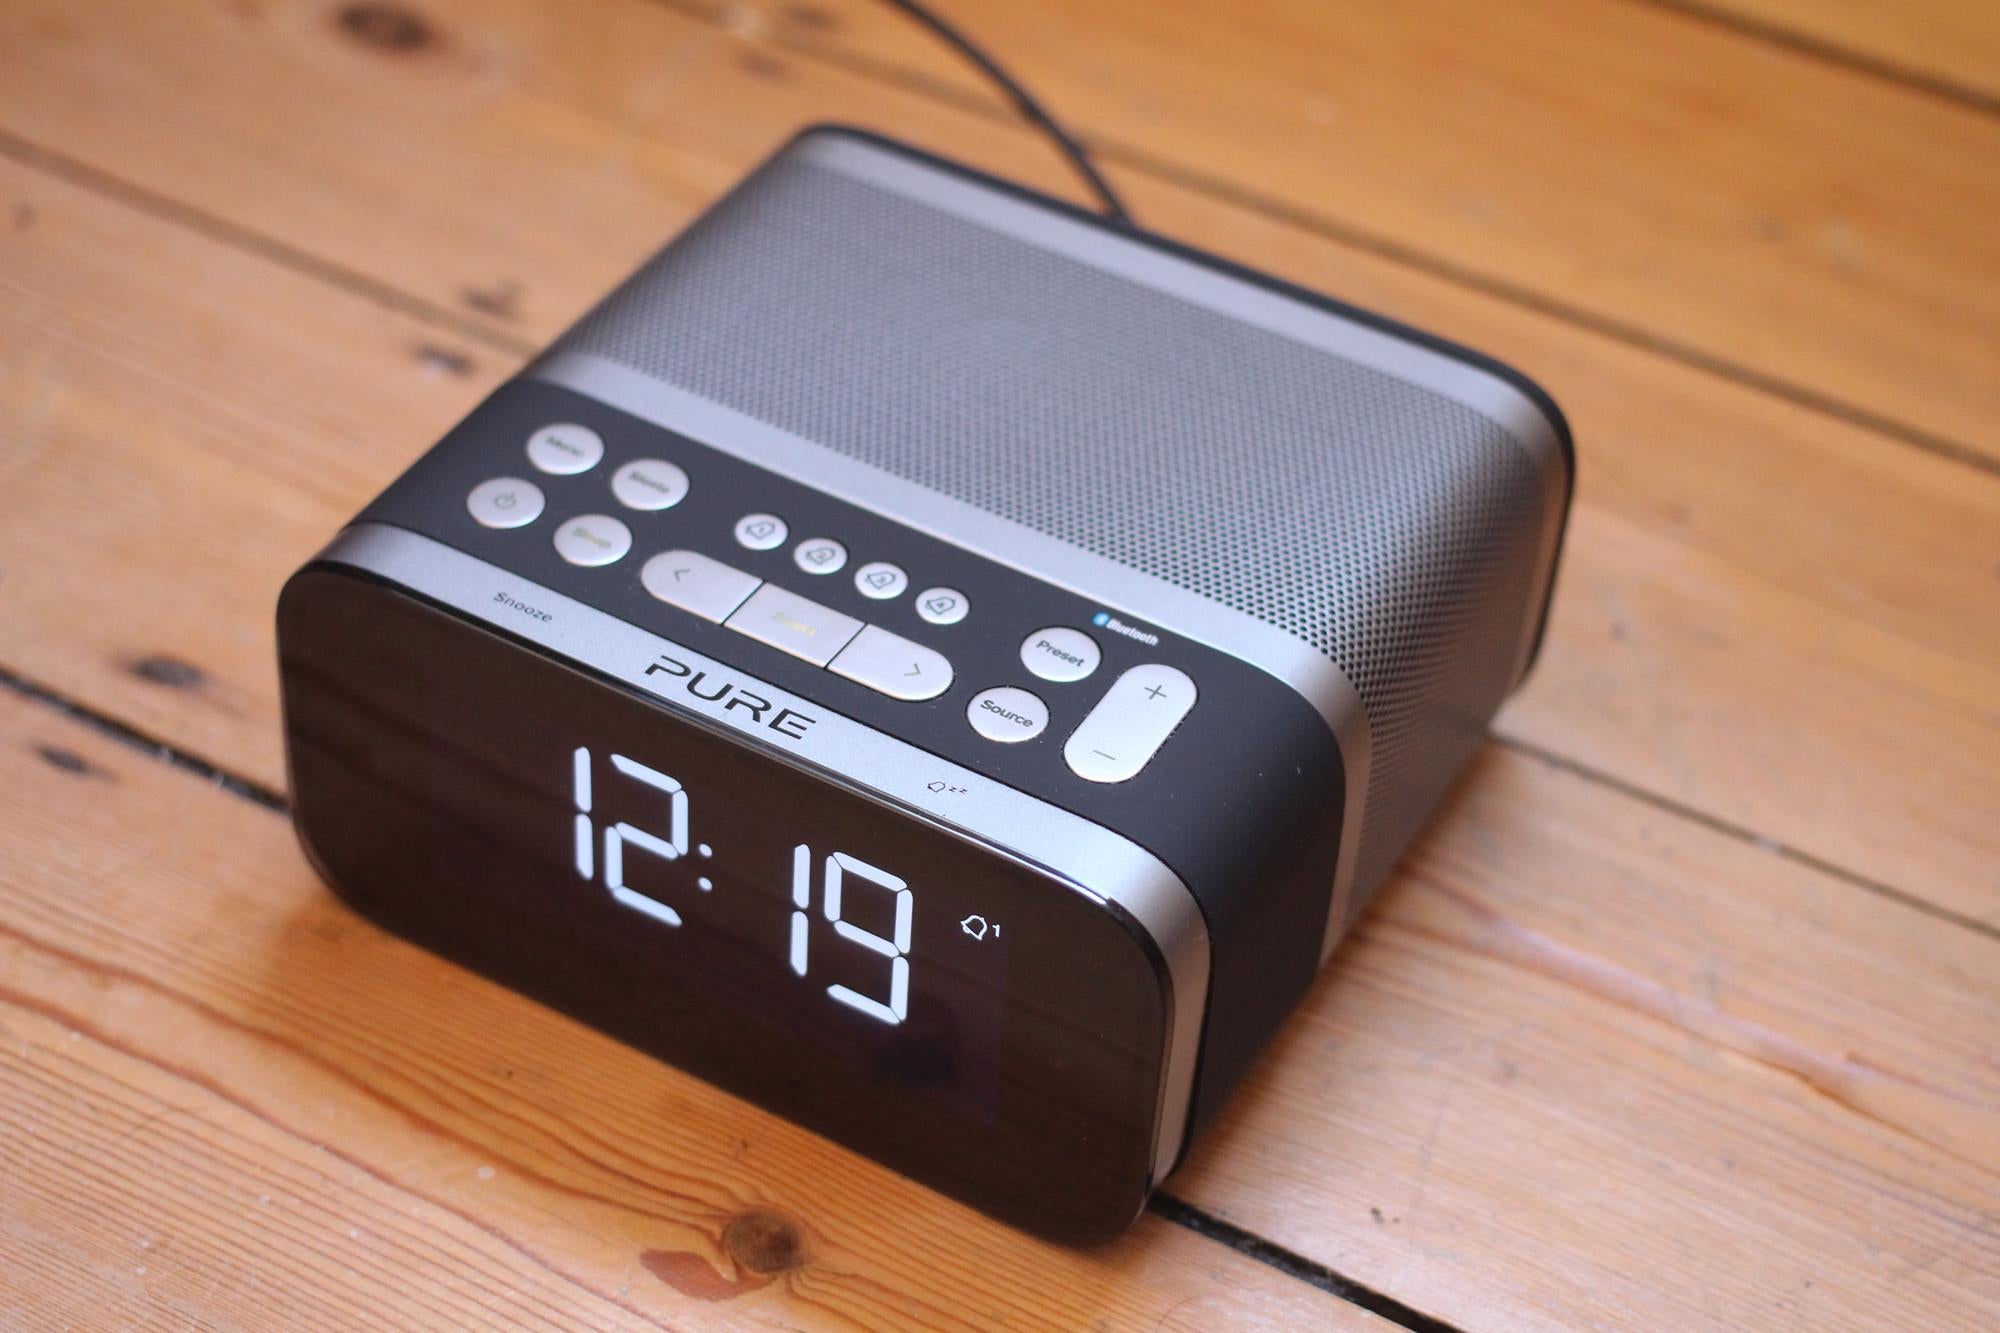 Pure Siesta S6 DAB Radio on Wooden Table Showing Time